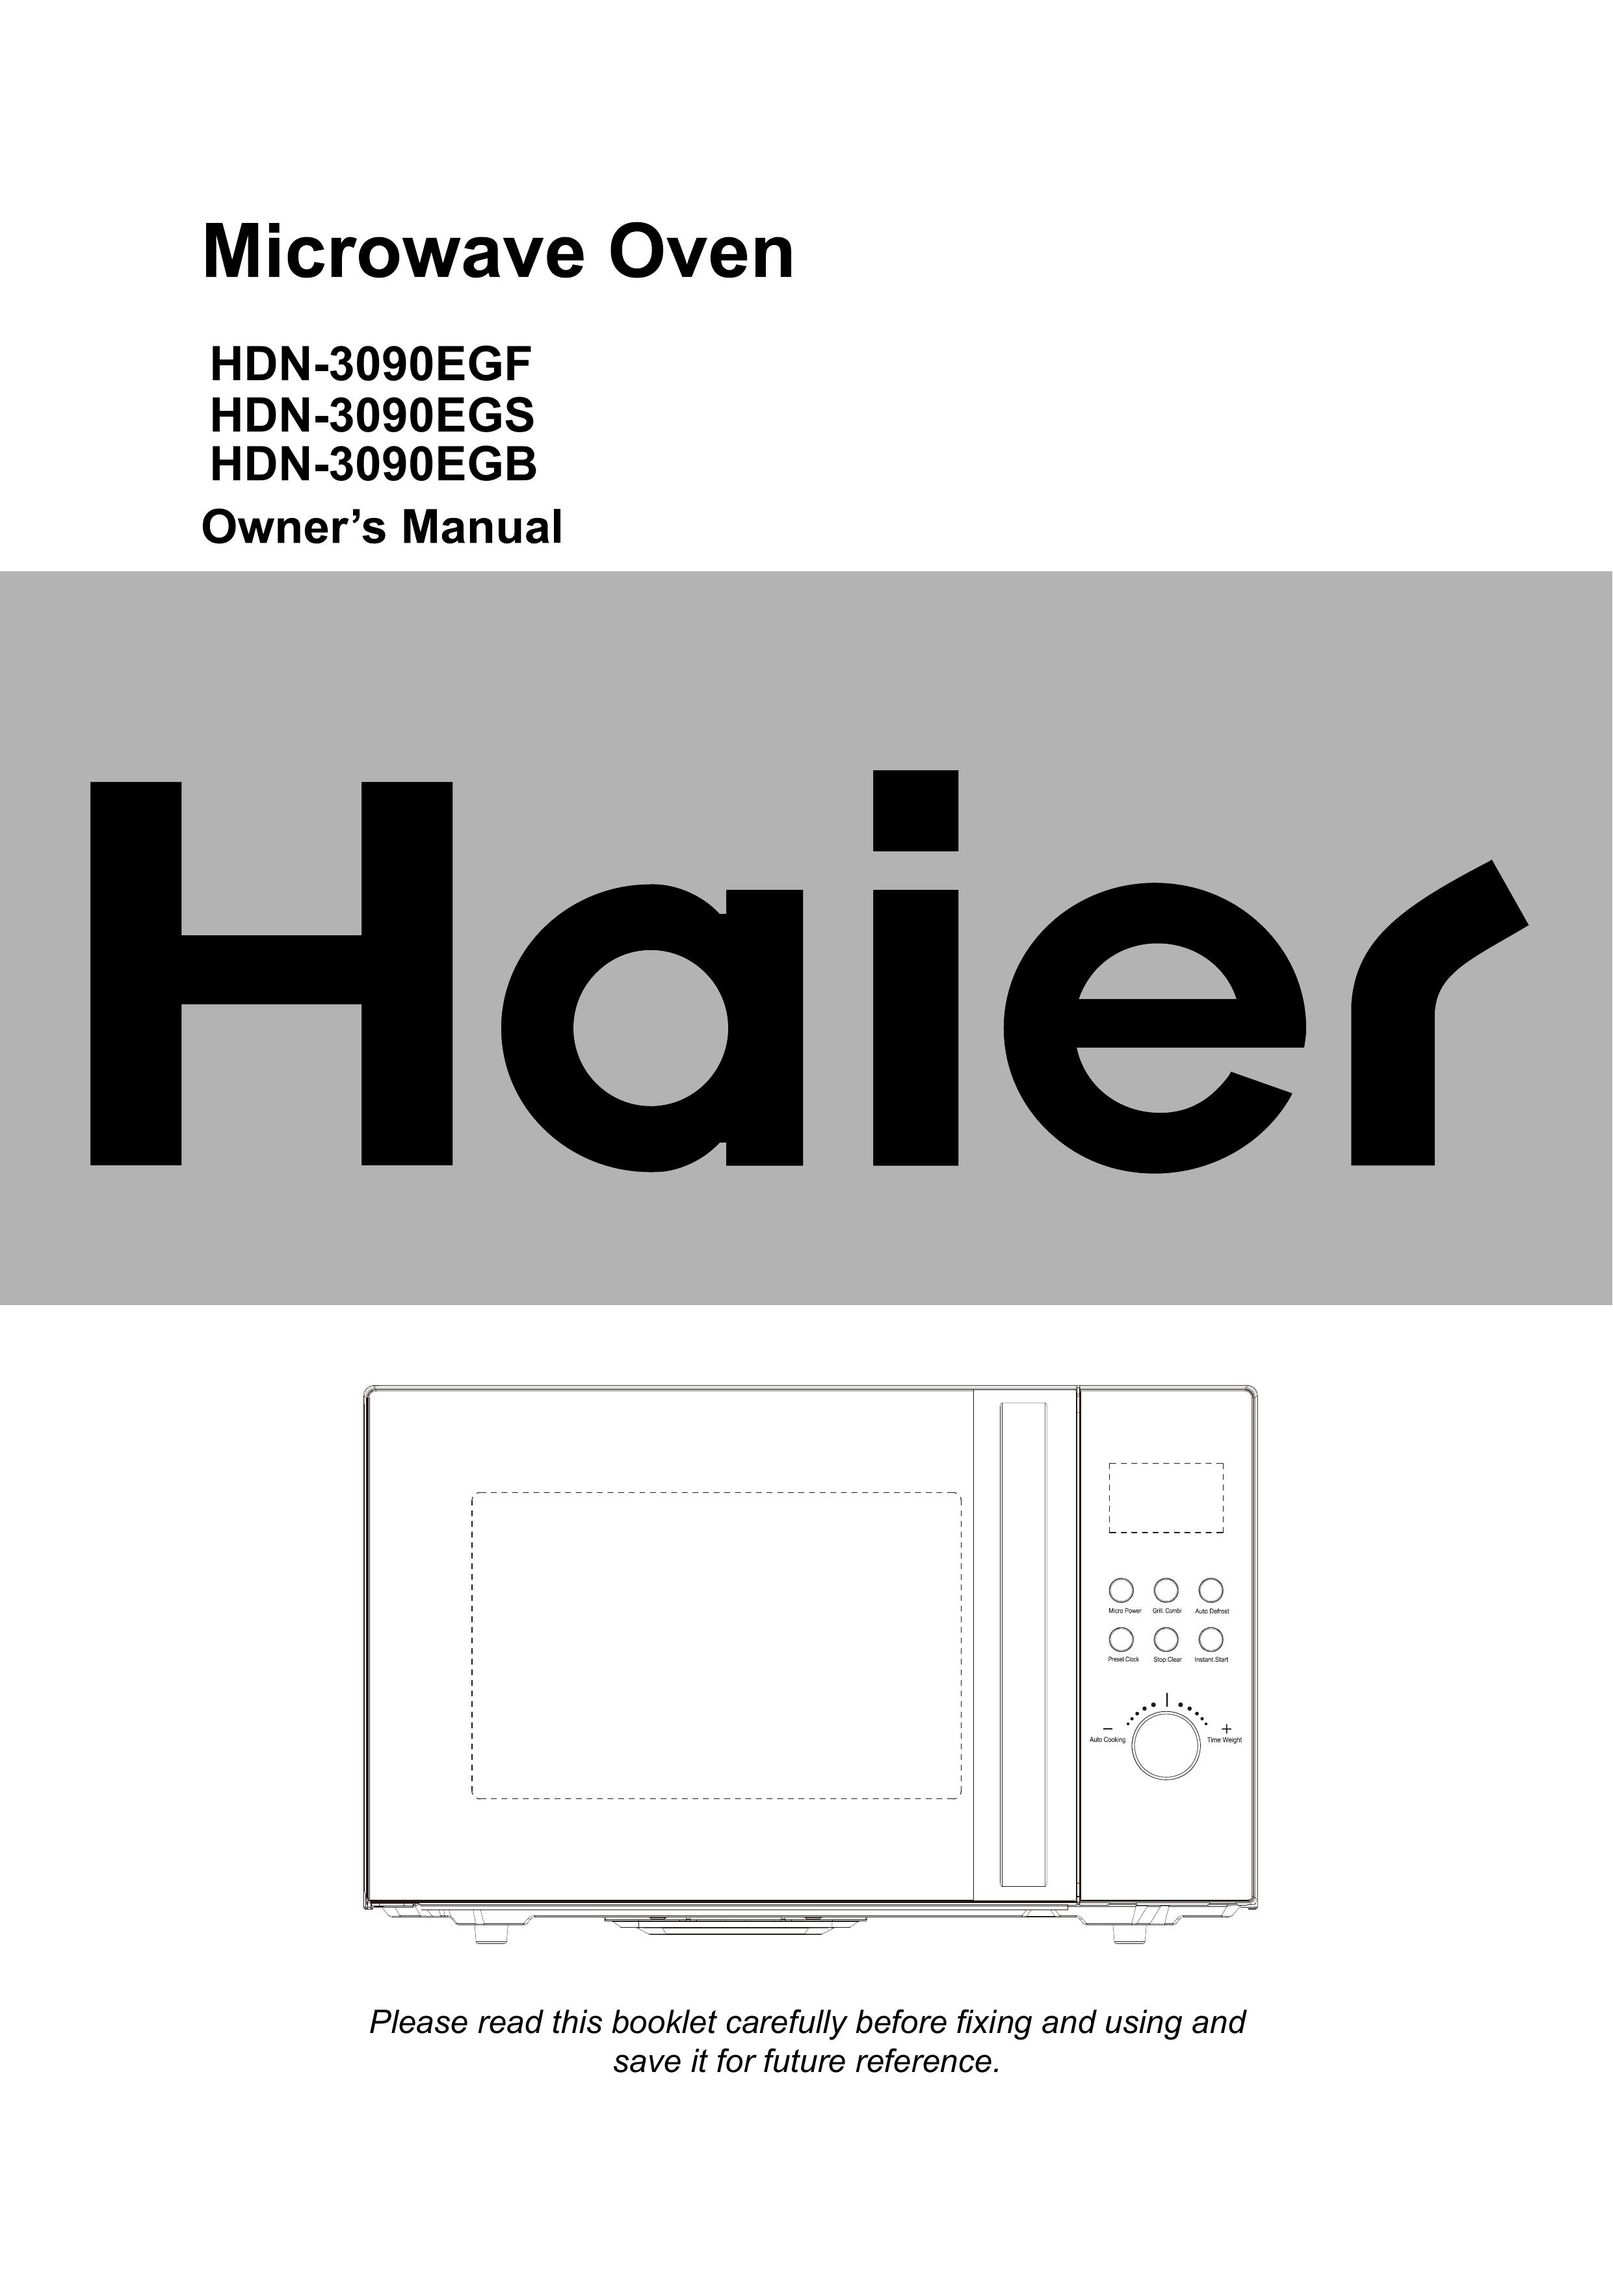 Haier HDN-3090EGS Microwave Oven User Manual